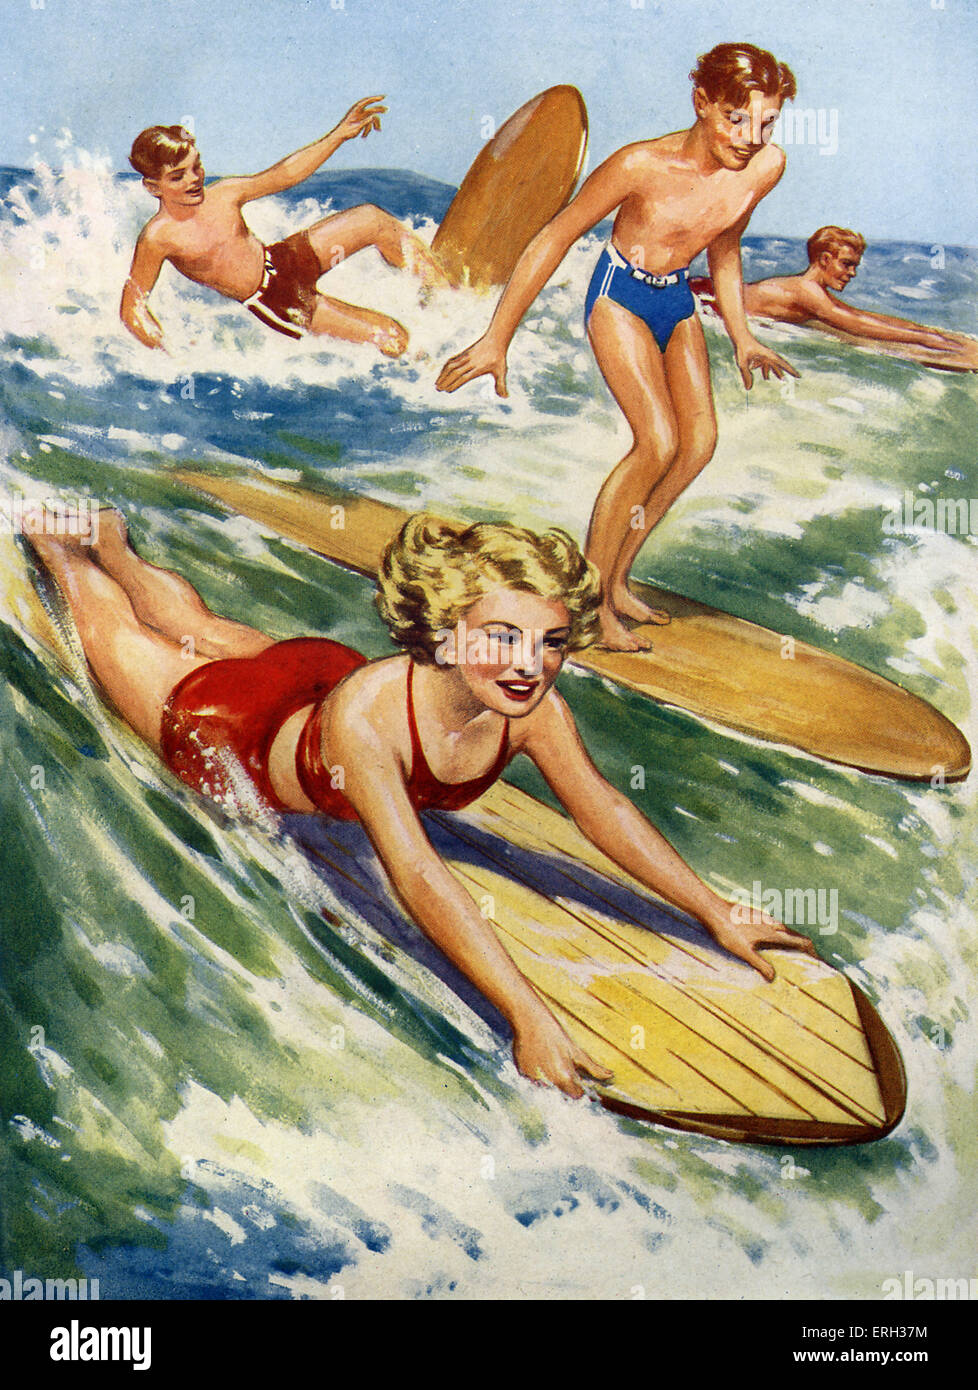 Surf-boarding, early 1950s. Illustration by unknown artist, from The Wonder Book of How It's Done. Caption reads: 'Surf-boarding - a thrilling seaside sport' Stock Photo